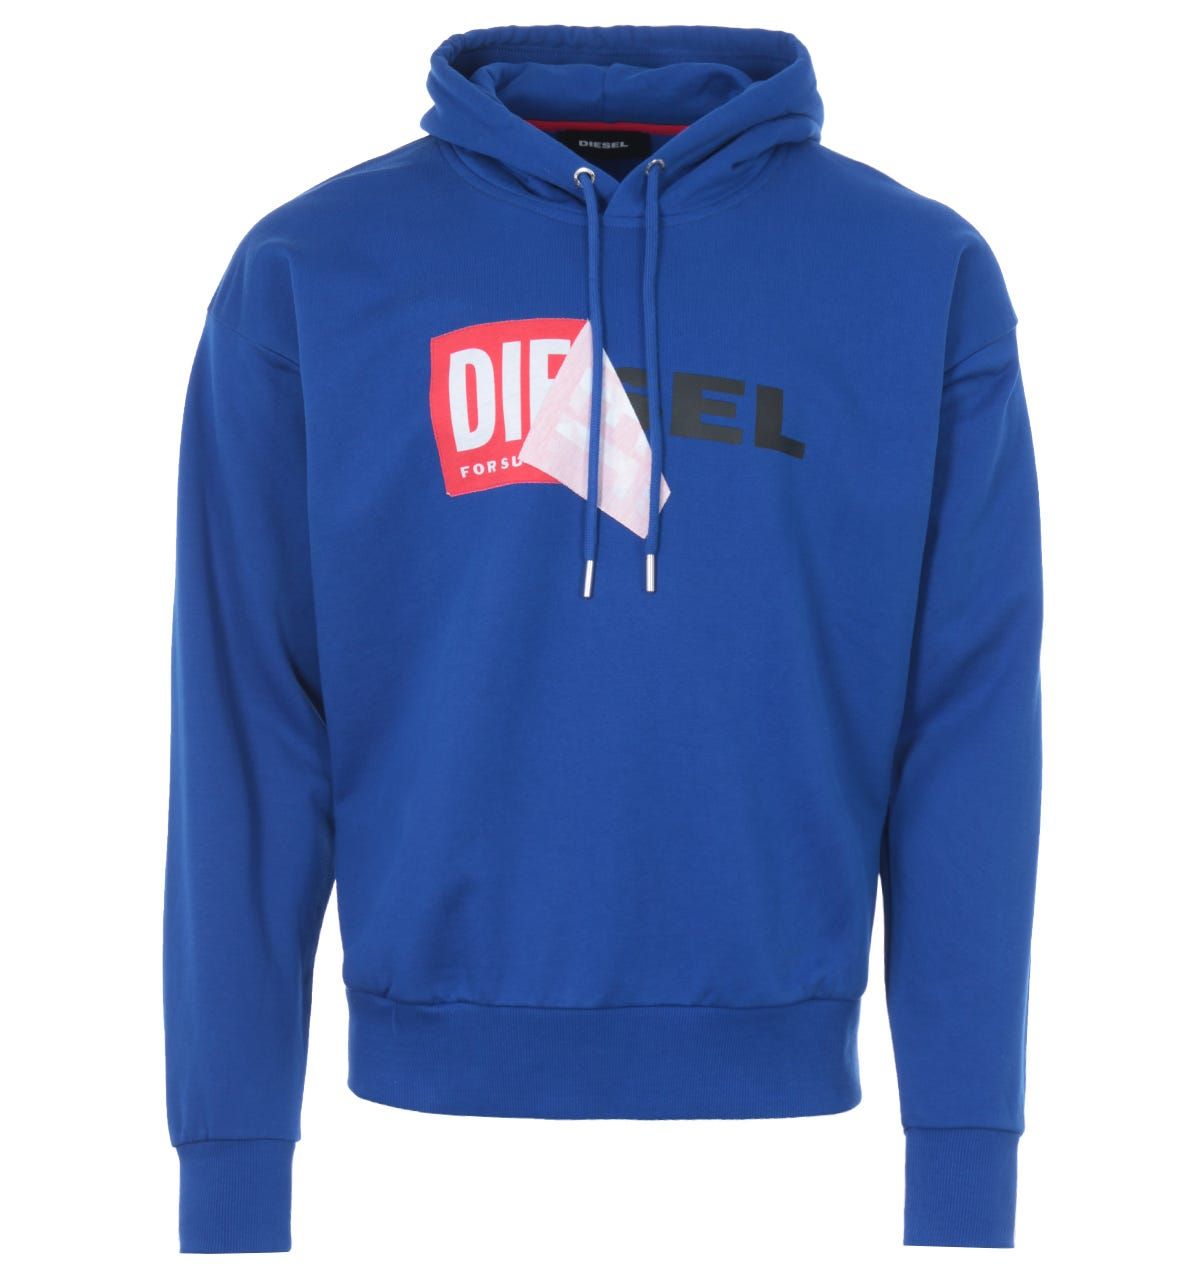 Crafted from pure smooth cotton, this hooded sweatshirt from Diesel is an ideal piece to refresh your wardrobe. Cut in an oversized fit for an effortless relaxed look. Featuring an adjustable drawstring hood and ribbed trims. Finished with the original Diesel logo in red with the brand new logo in black underneath, printed across the chest.Oversized Fit, Pure Cotton Composition , Adjustable Drawstring Hood, Ribbed Cuffs & Hemline, Diesel Branding. Style & Fit:Oversized Fit, Fits True to Size. Composition & Care:100% Cotton, Machine Wash.